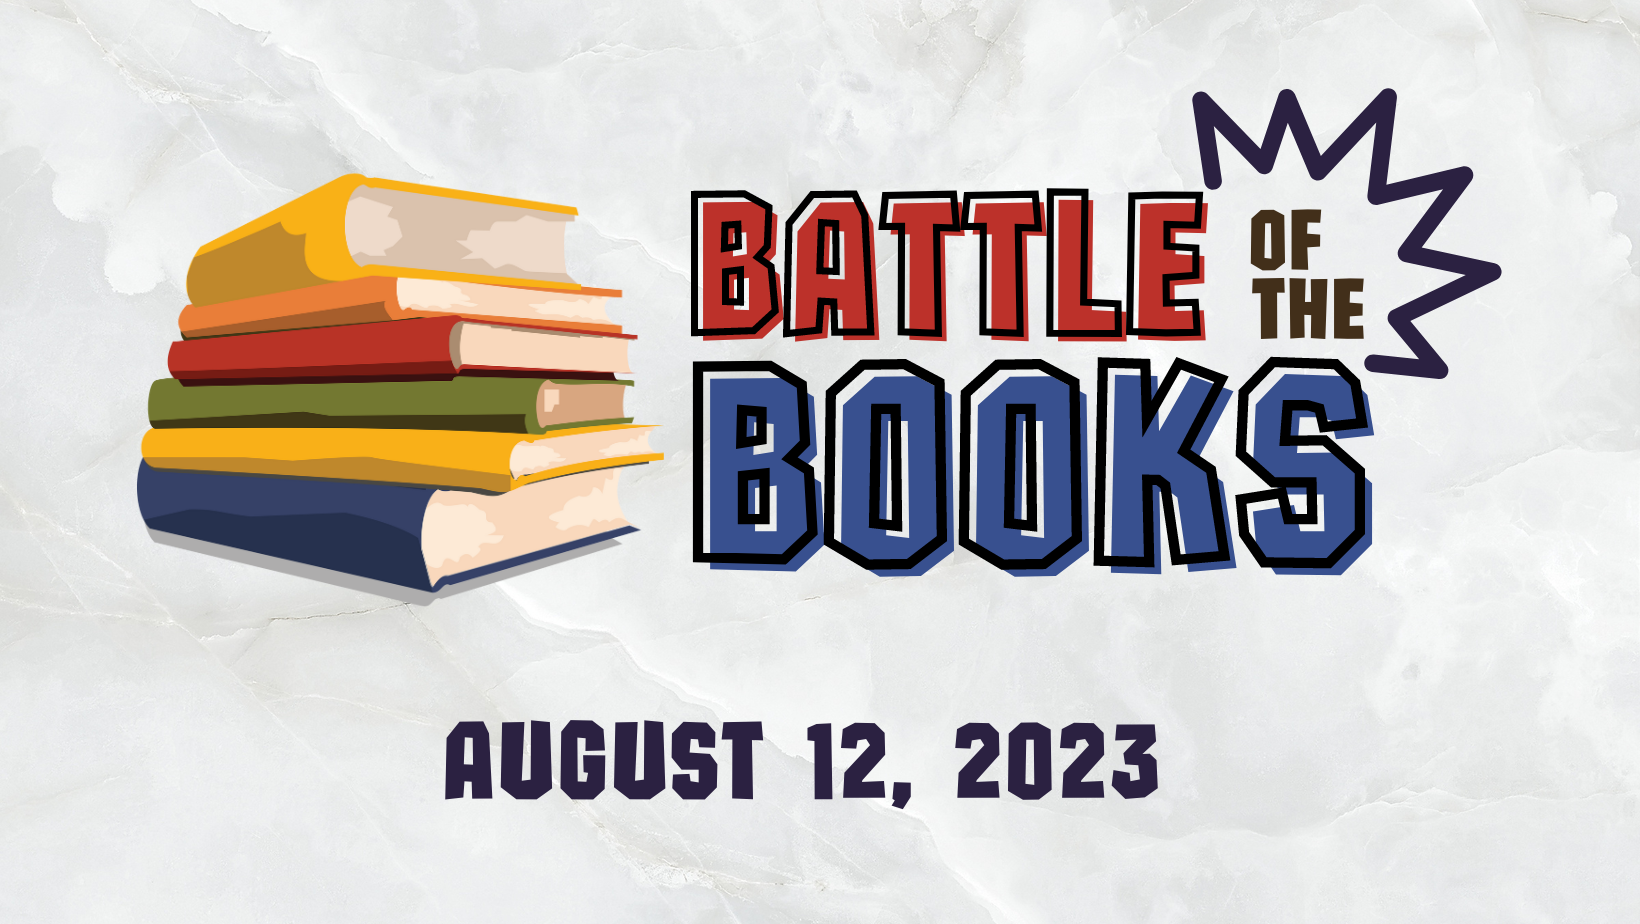 Battle of the Books August 12, 2023